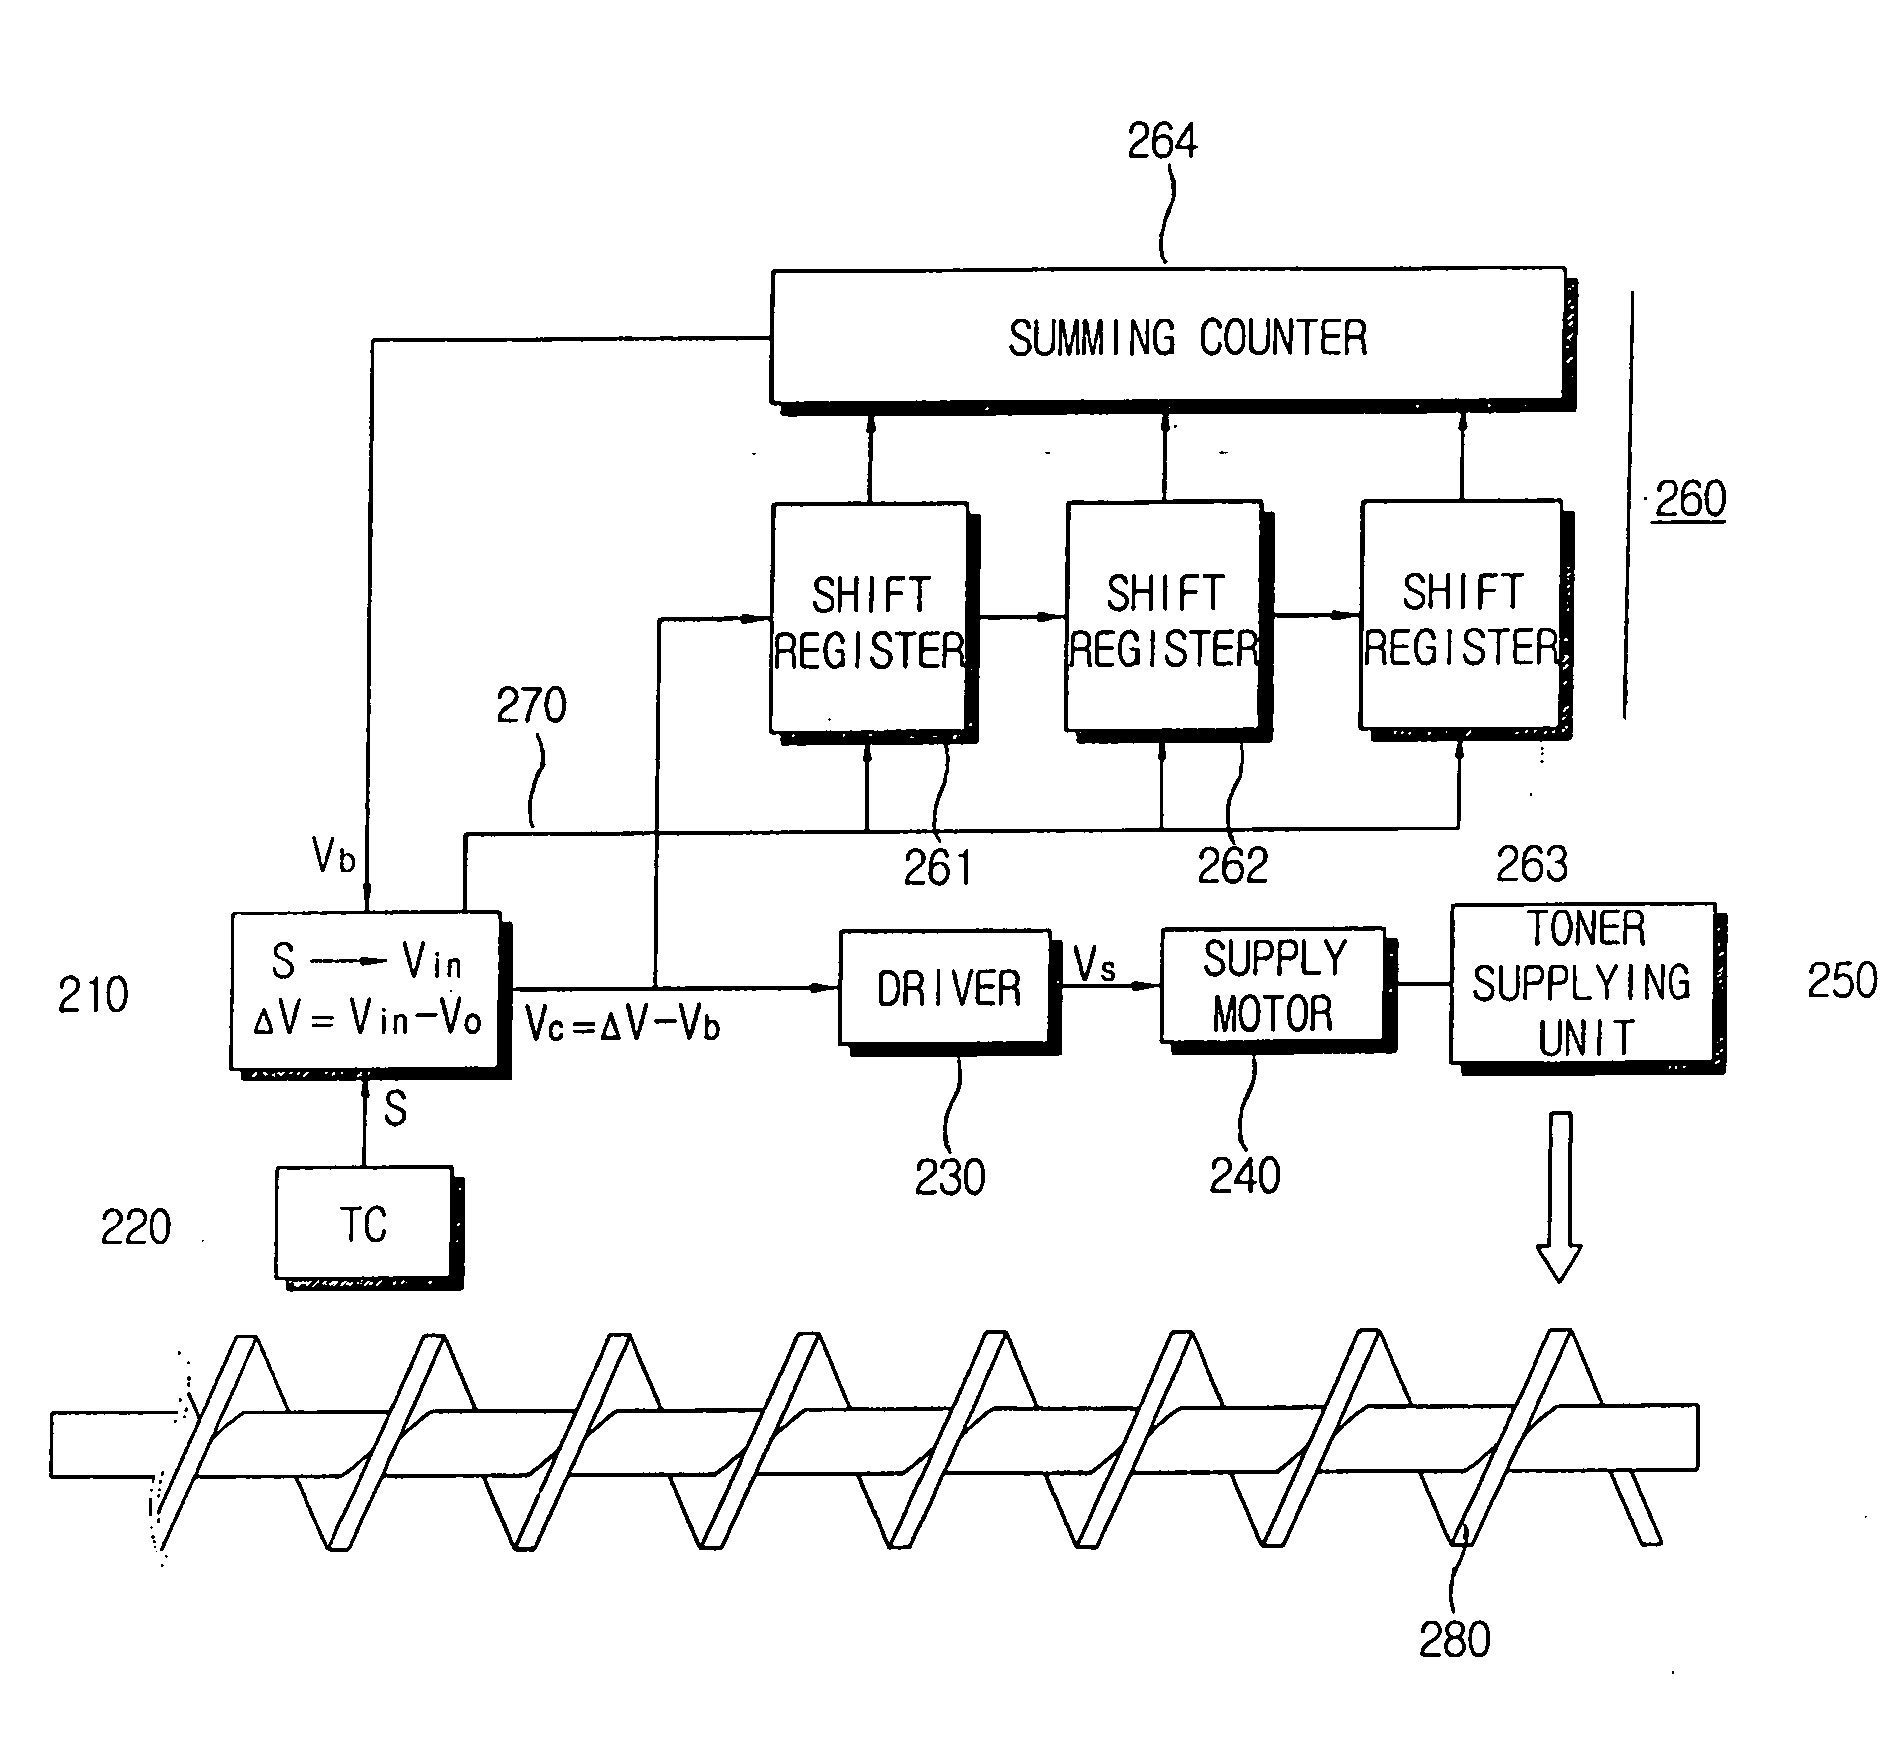 Image forming apparatus capable controlling toner supply